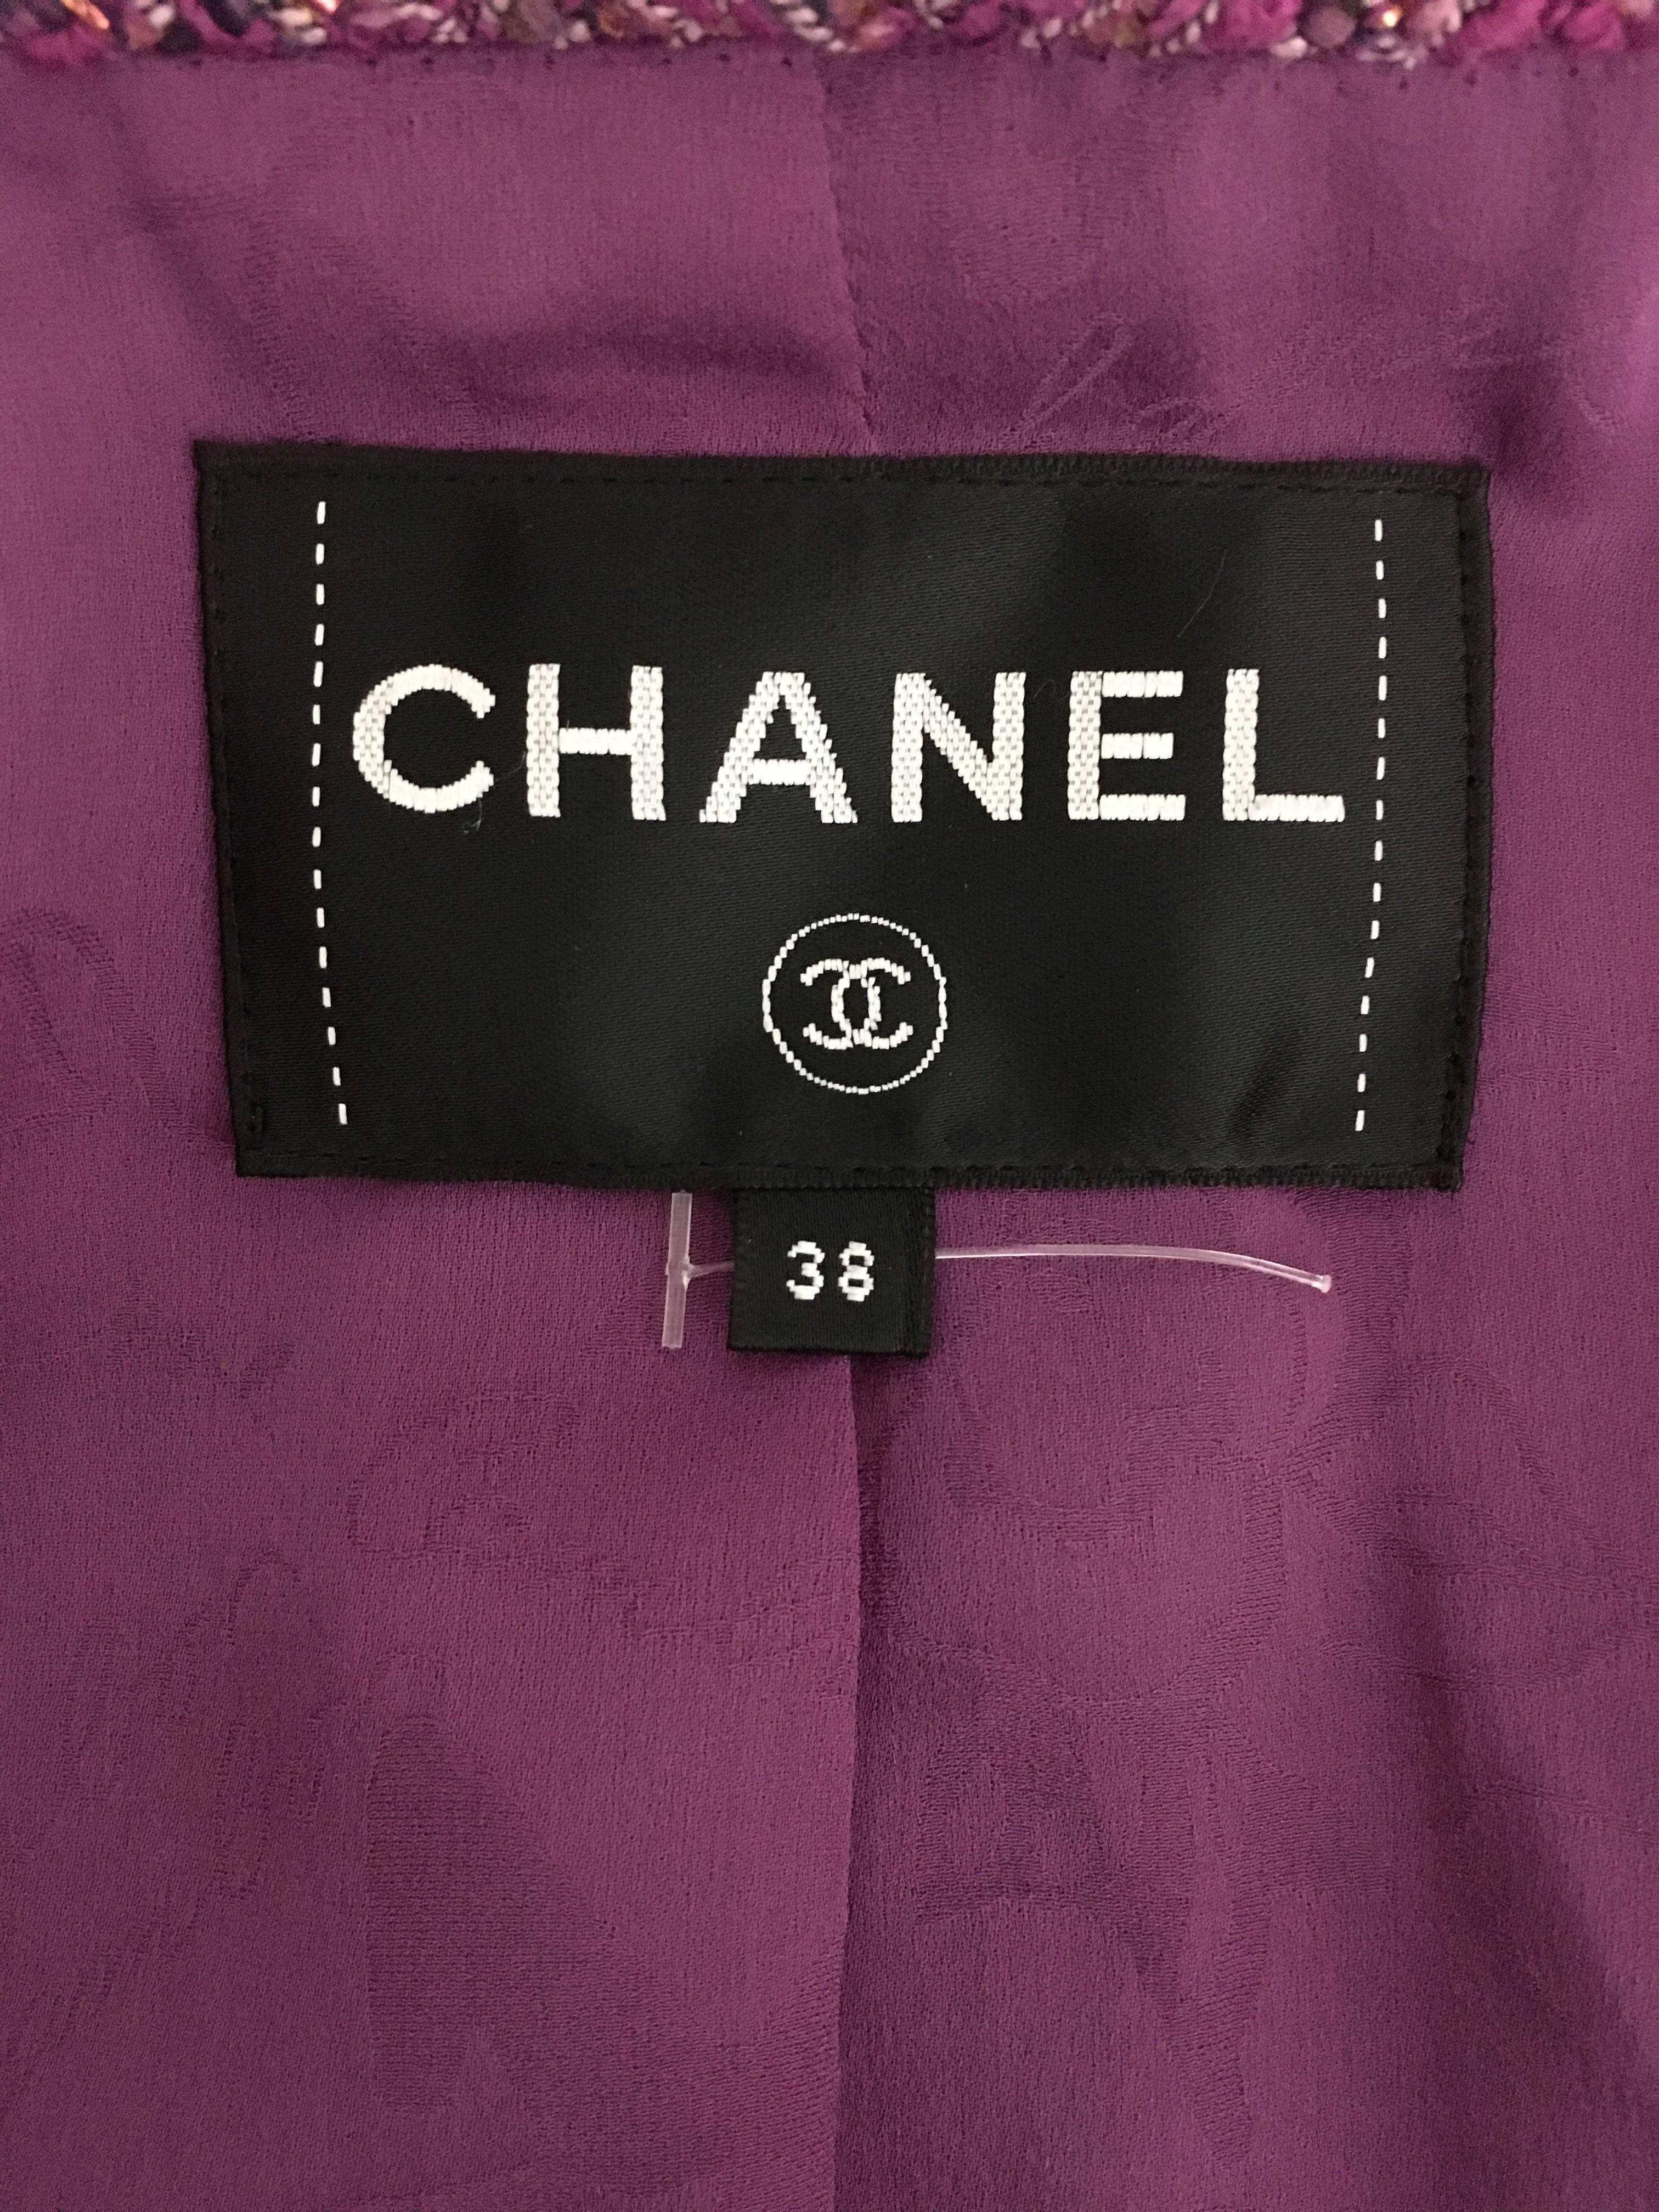 Chanel 2017 Pur/Mauv/Coral FantasyTweed Zip Front Jacket FR38 New For Sale 2